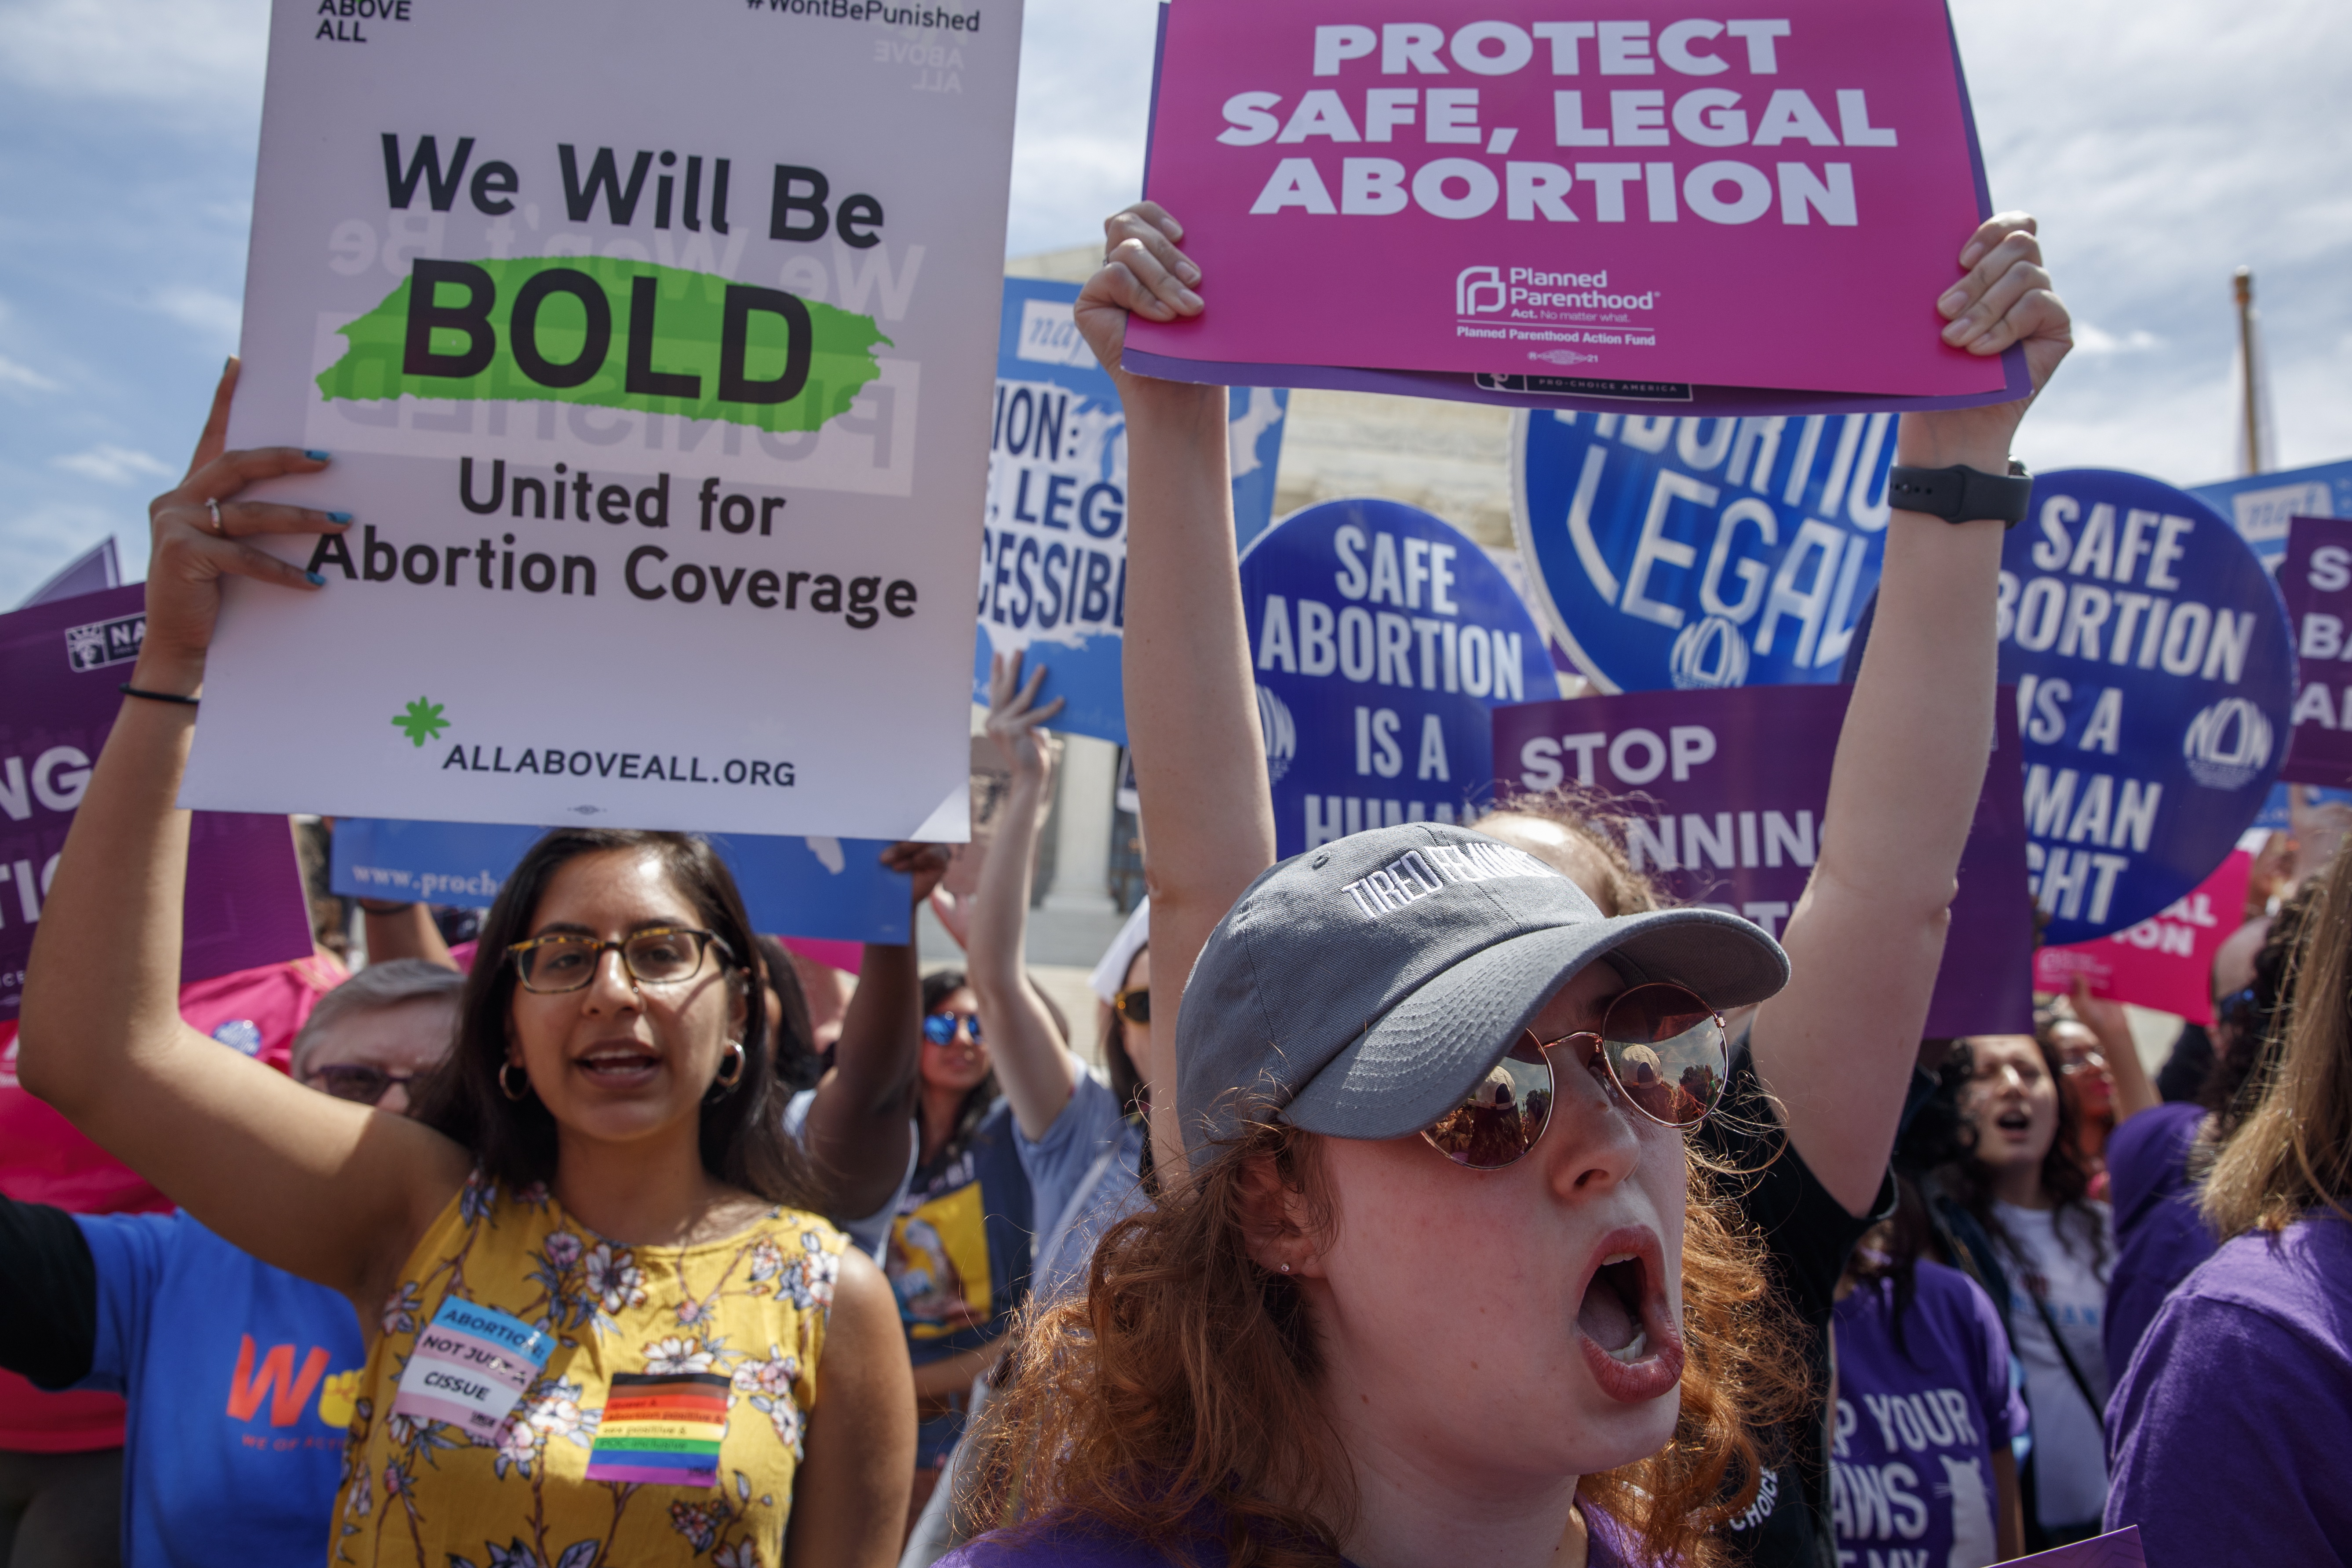 epa07590082 Pro-abortion rights activists protest at the Supreme Court in Washington, DC, USA, 21 May 2019. Nationwide protests have activists calling for reproductive freedom and a halt to new laws limiting abortion services.  EPA/SHAWN THEW